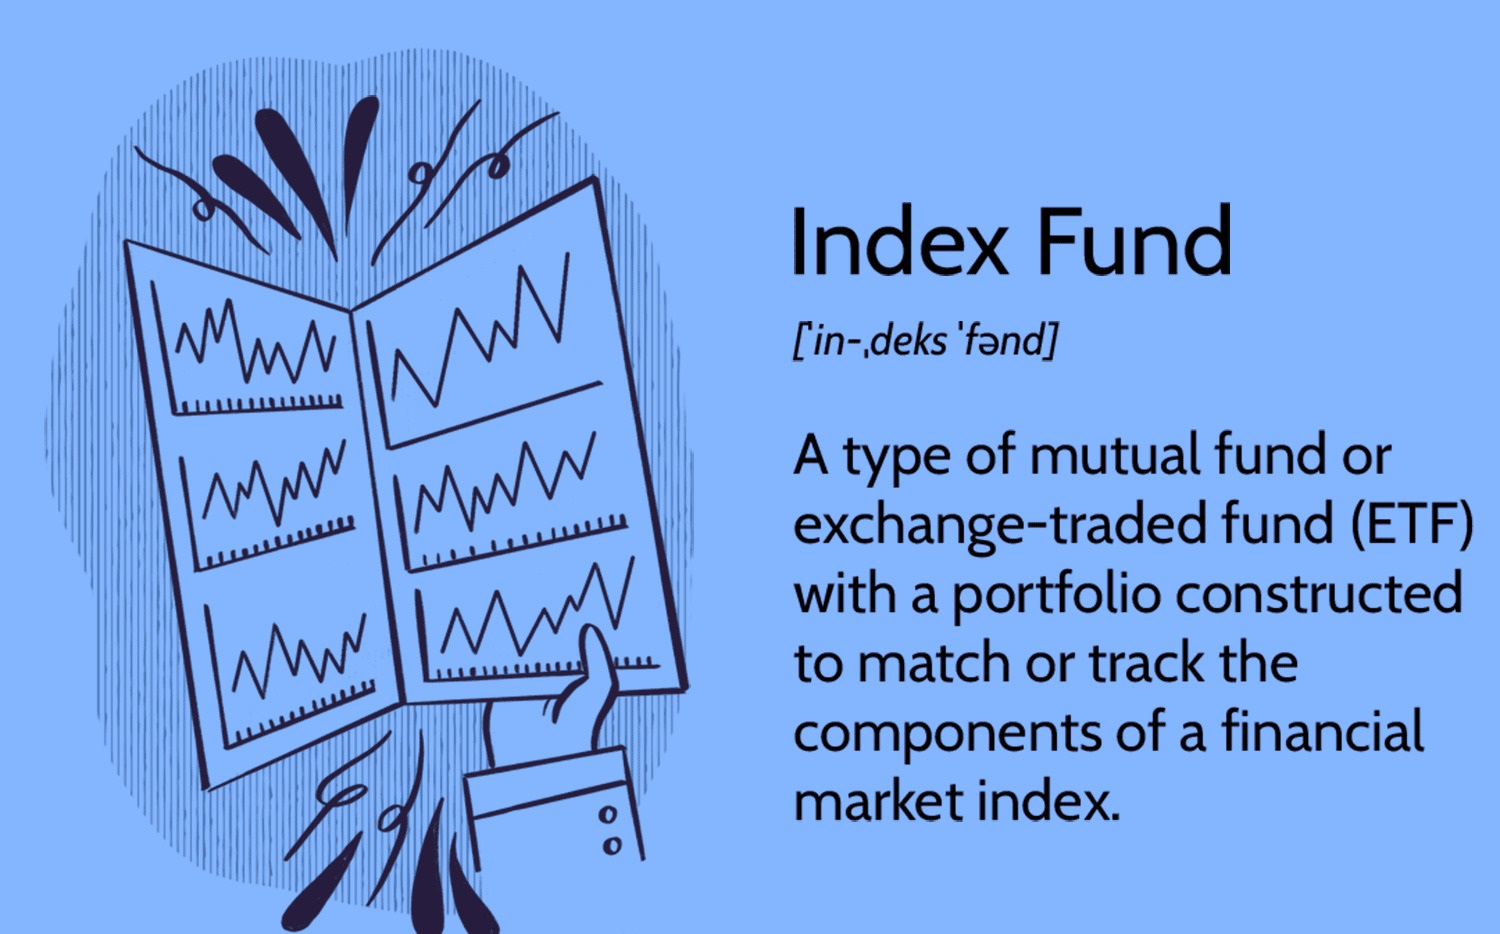 what-types-of-investments-are-typically-in-passively-managed-index-funds